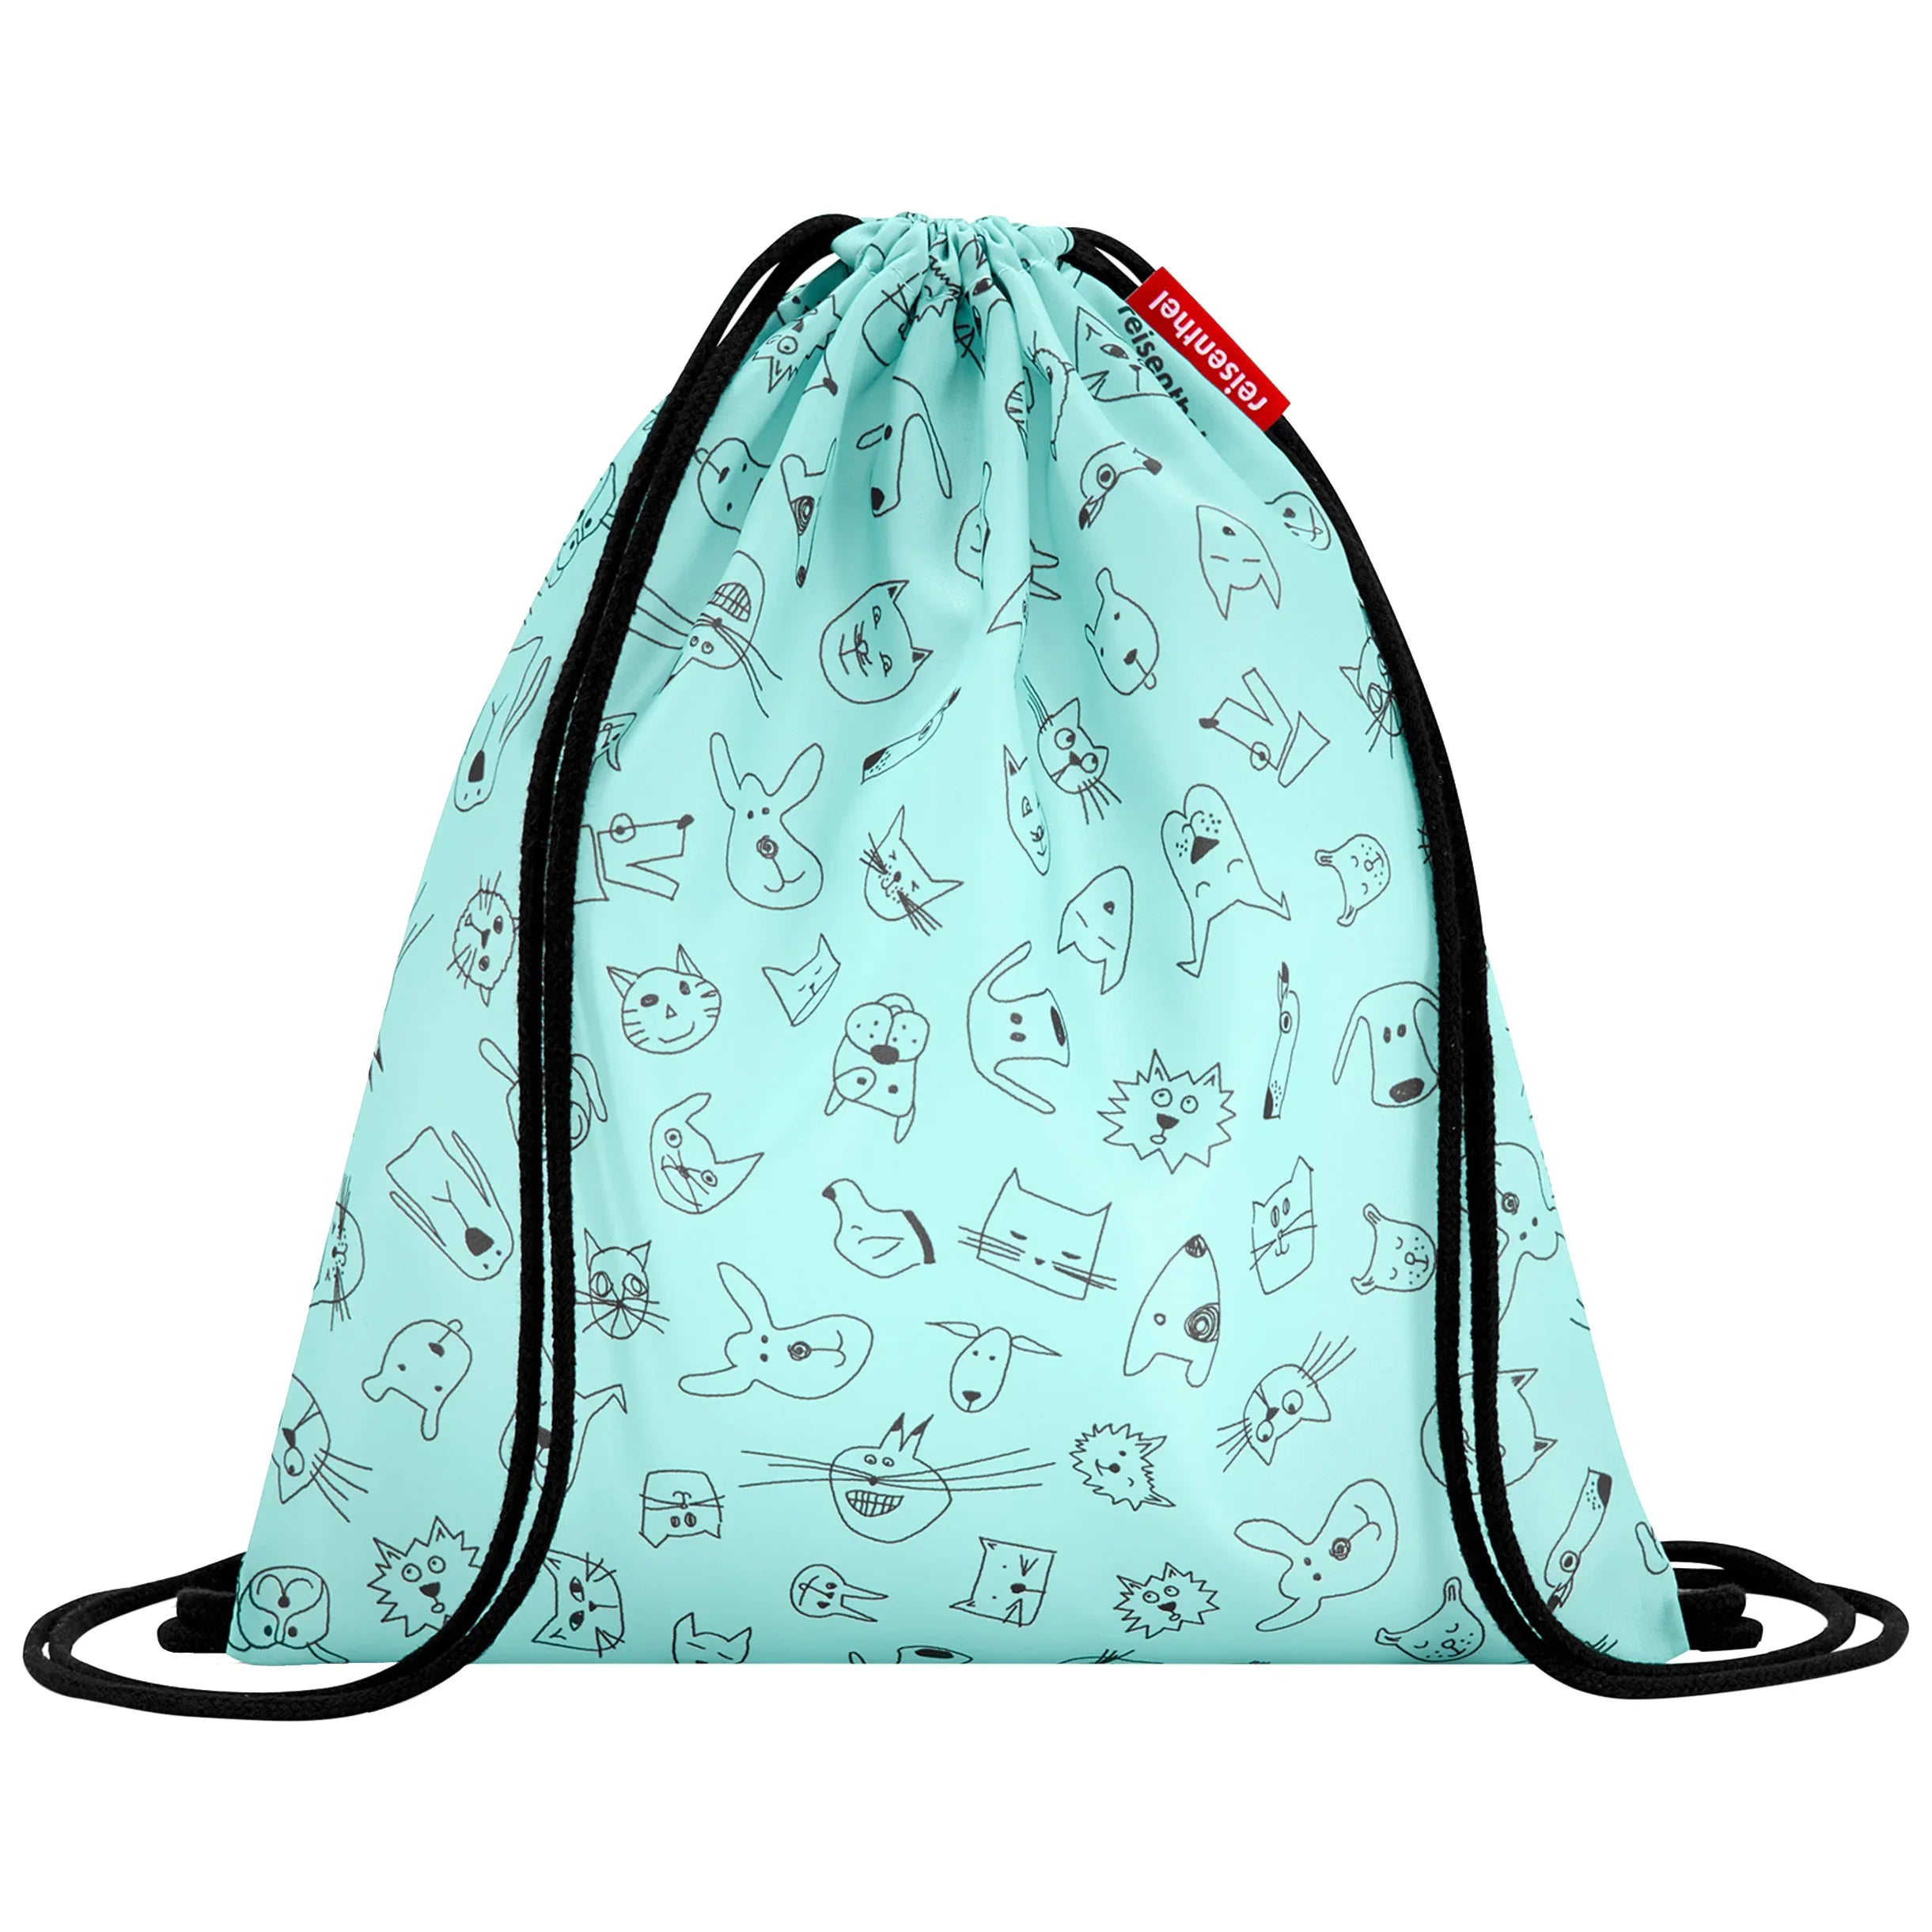 Reisenthel Kids Mysack sports bag 34 cm - cats and dogs mint